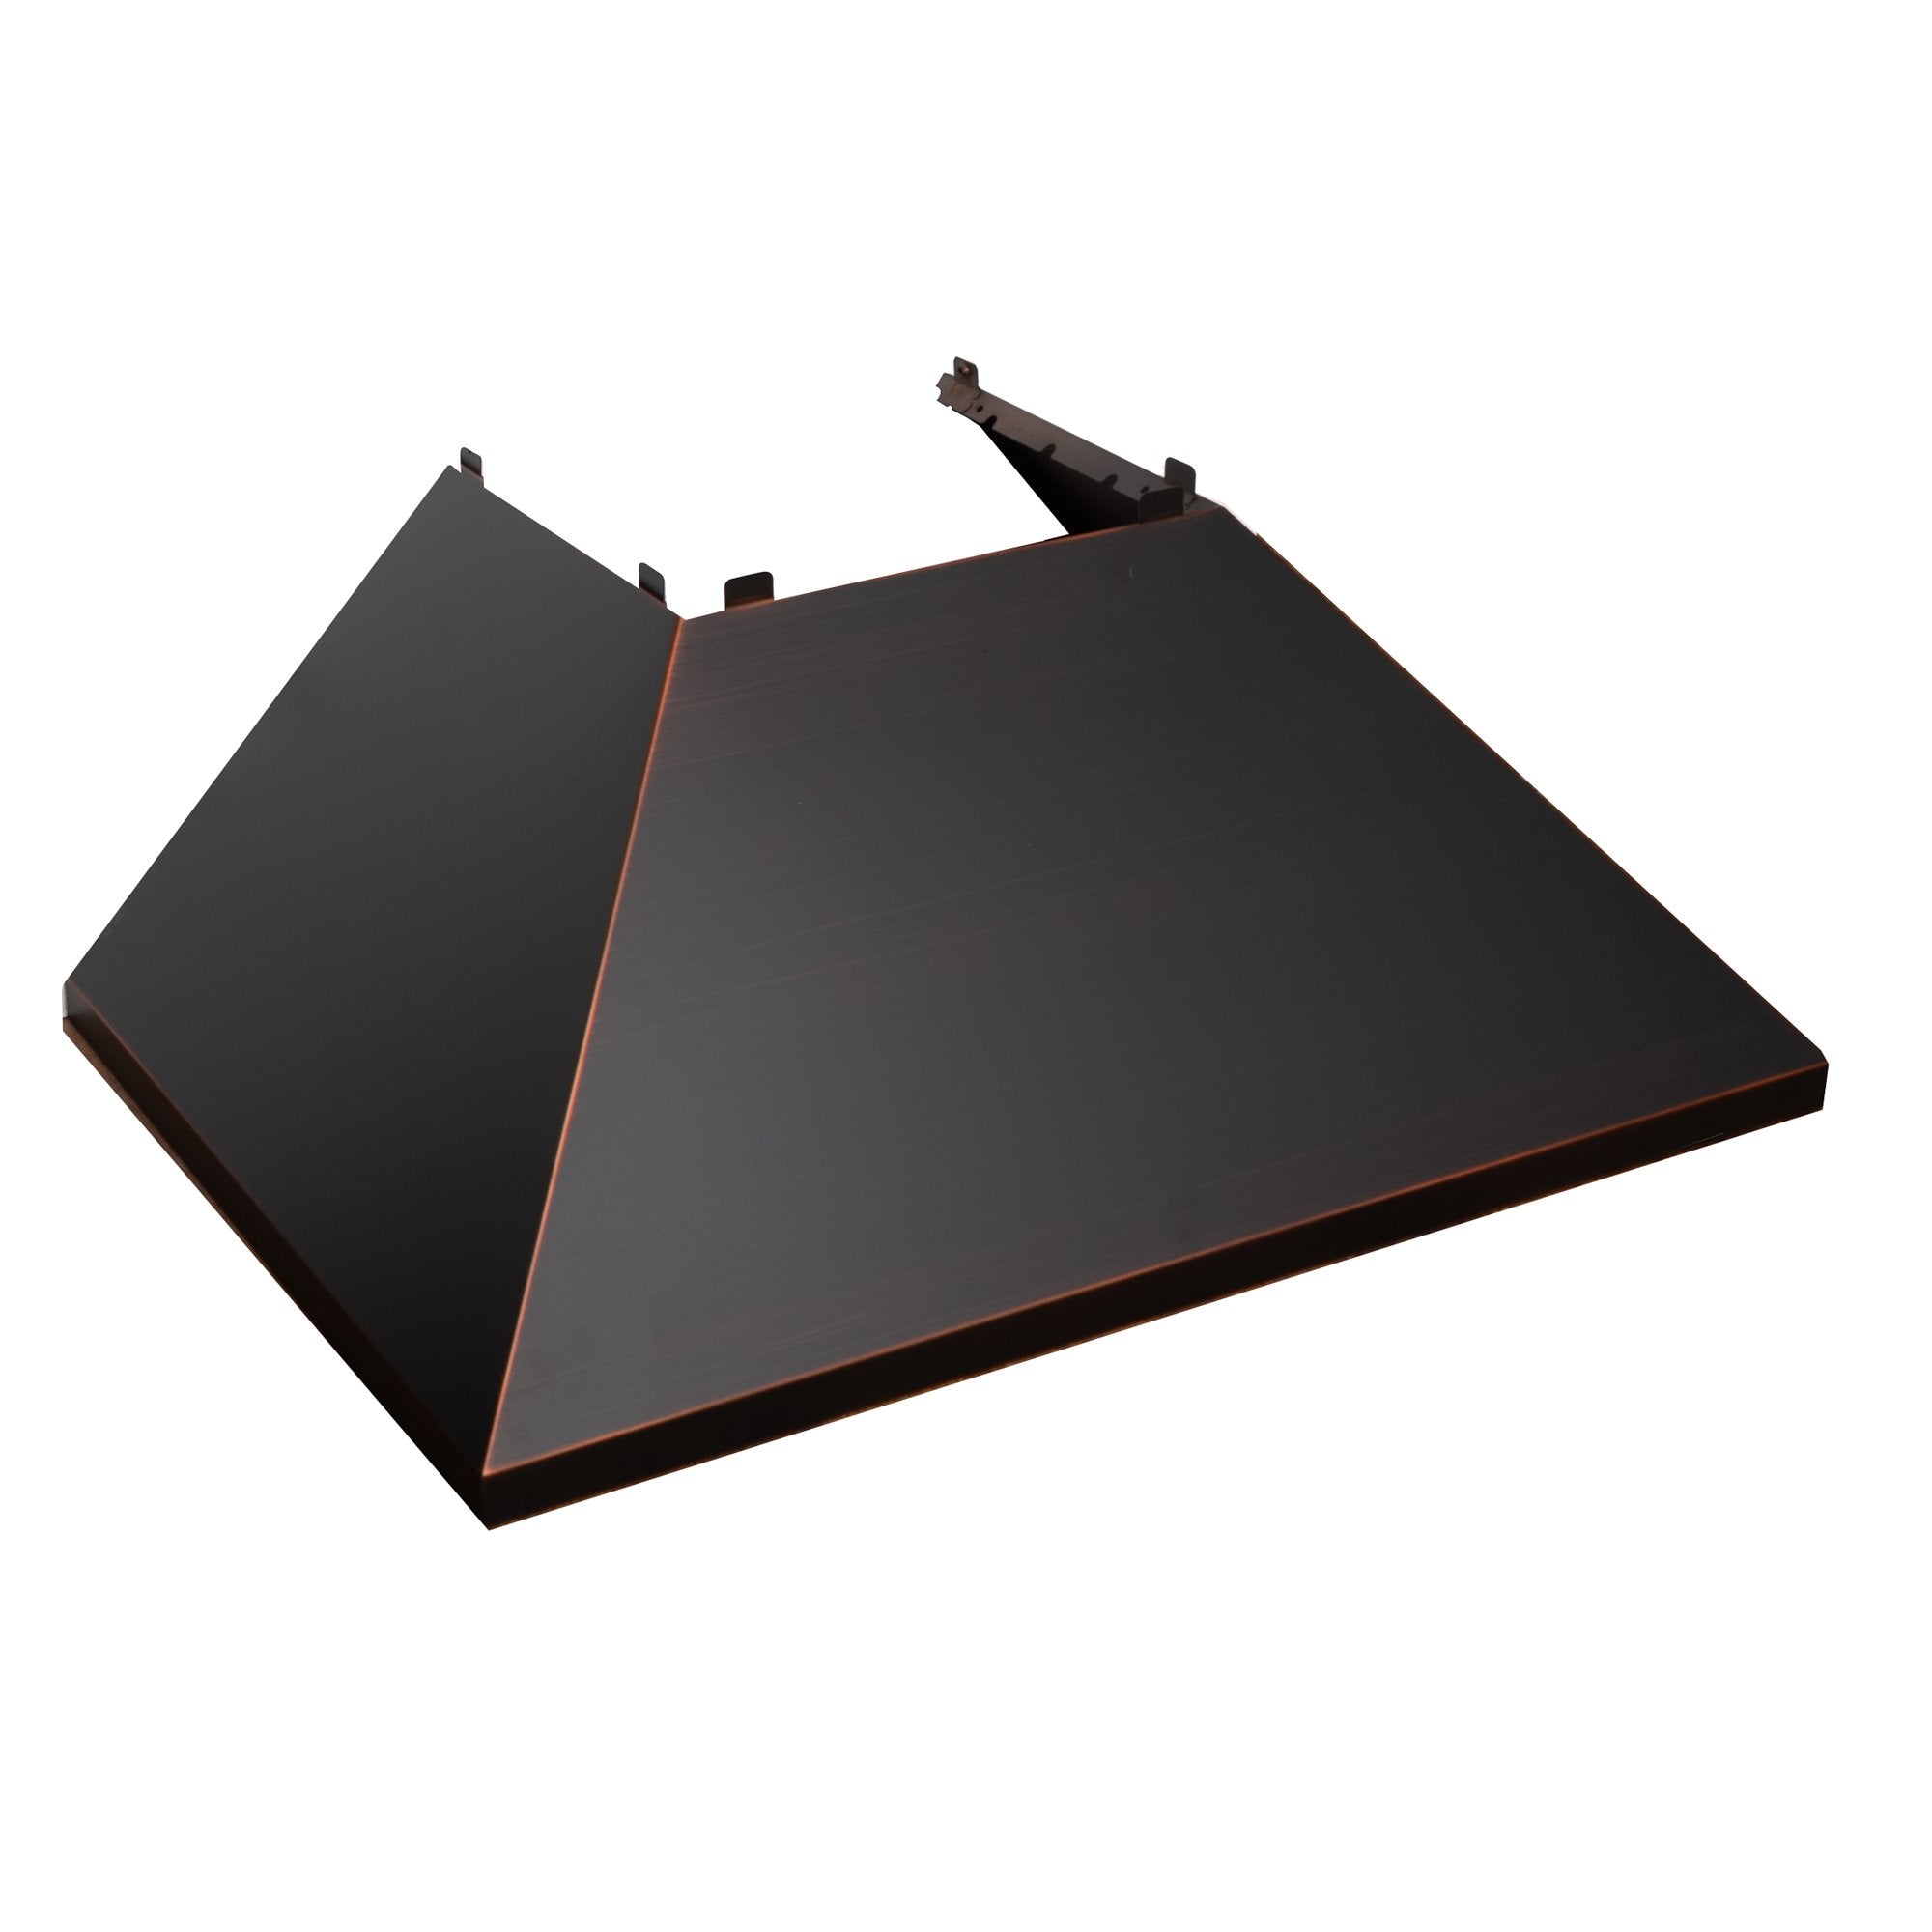 DuraSnow® Stainless Steel Range Hood with Oil Rubbed Bronze Shell (8654ORB)